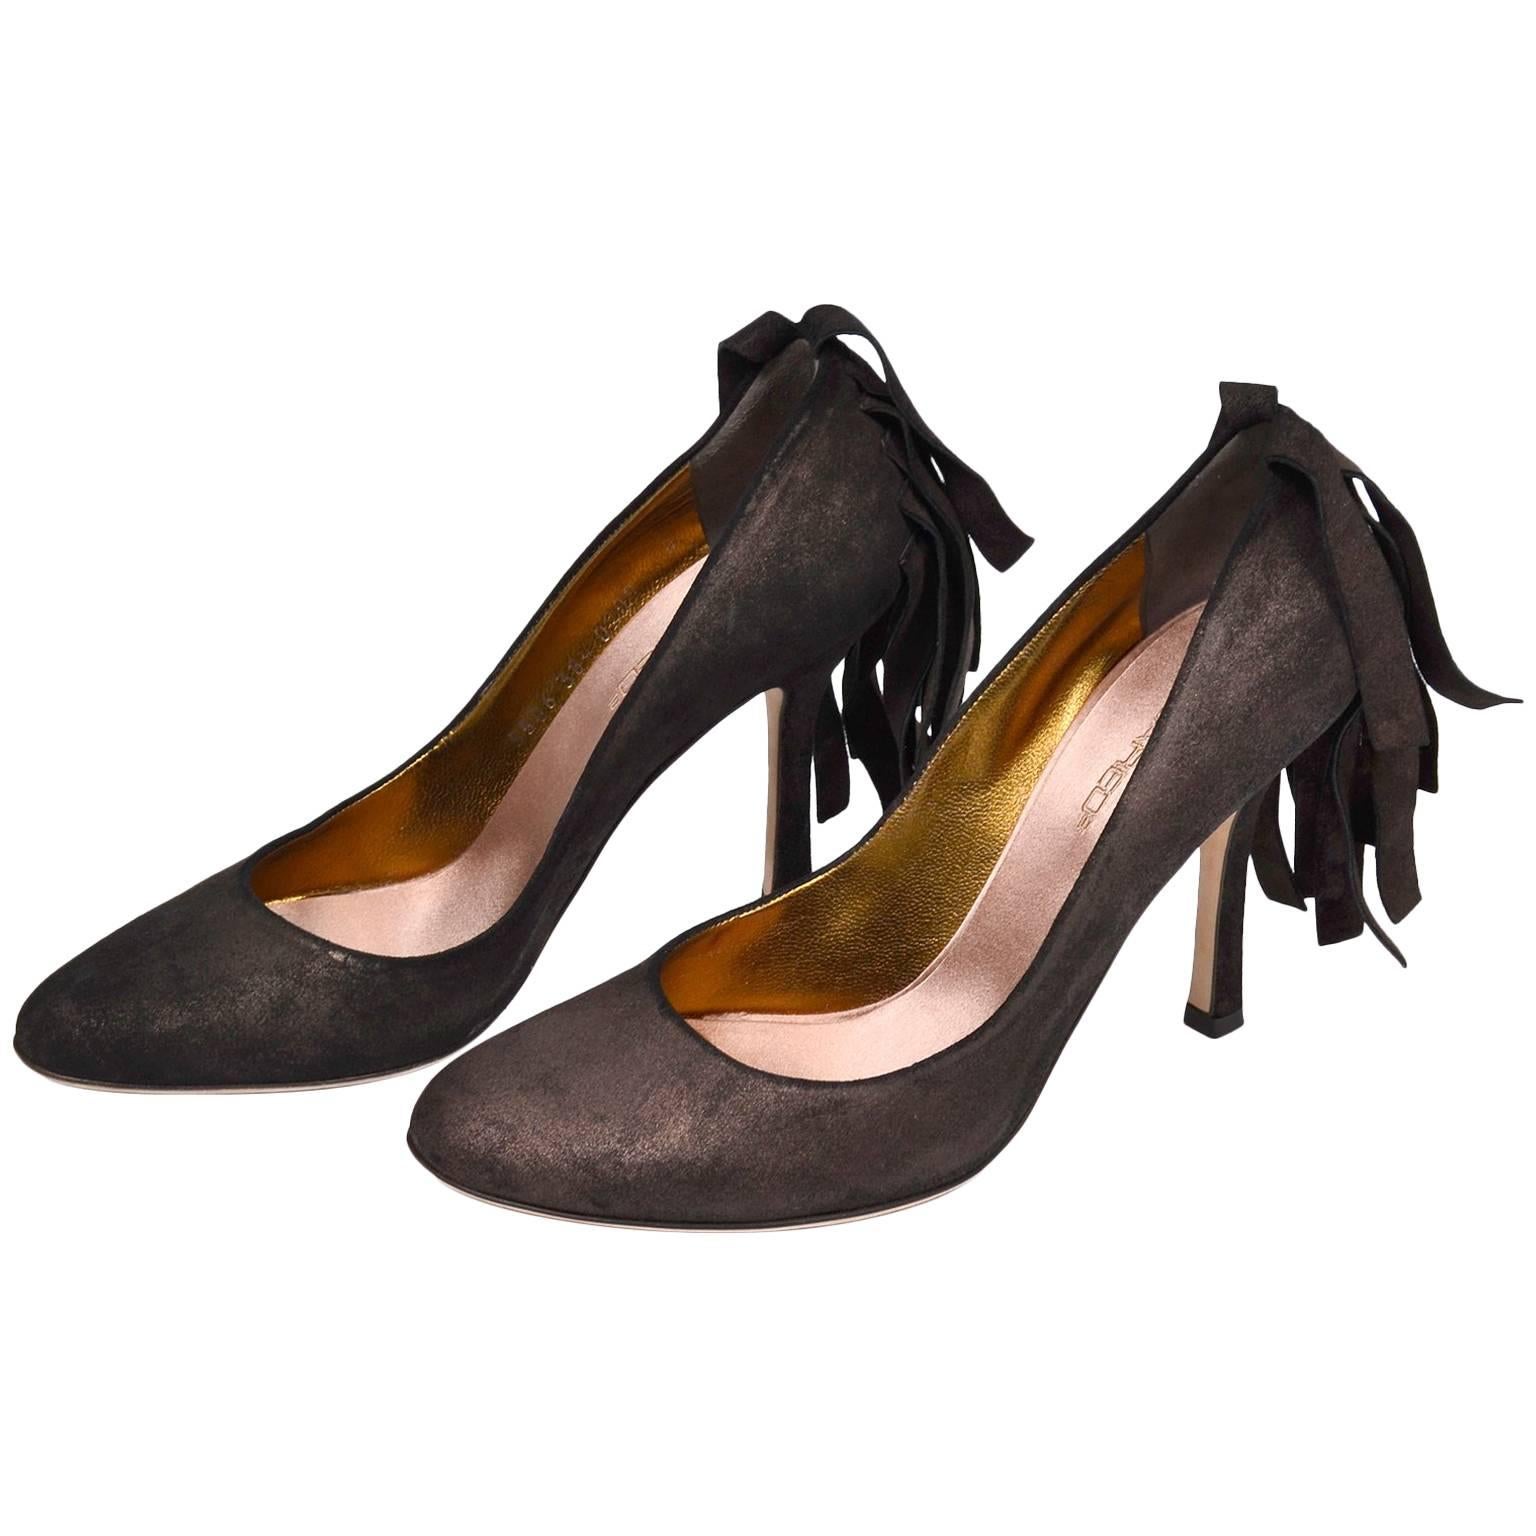 Dsquared2 Shoes in Brown Suede With Wide Fringe on Heels Size 38.5